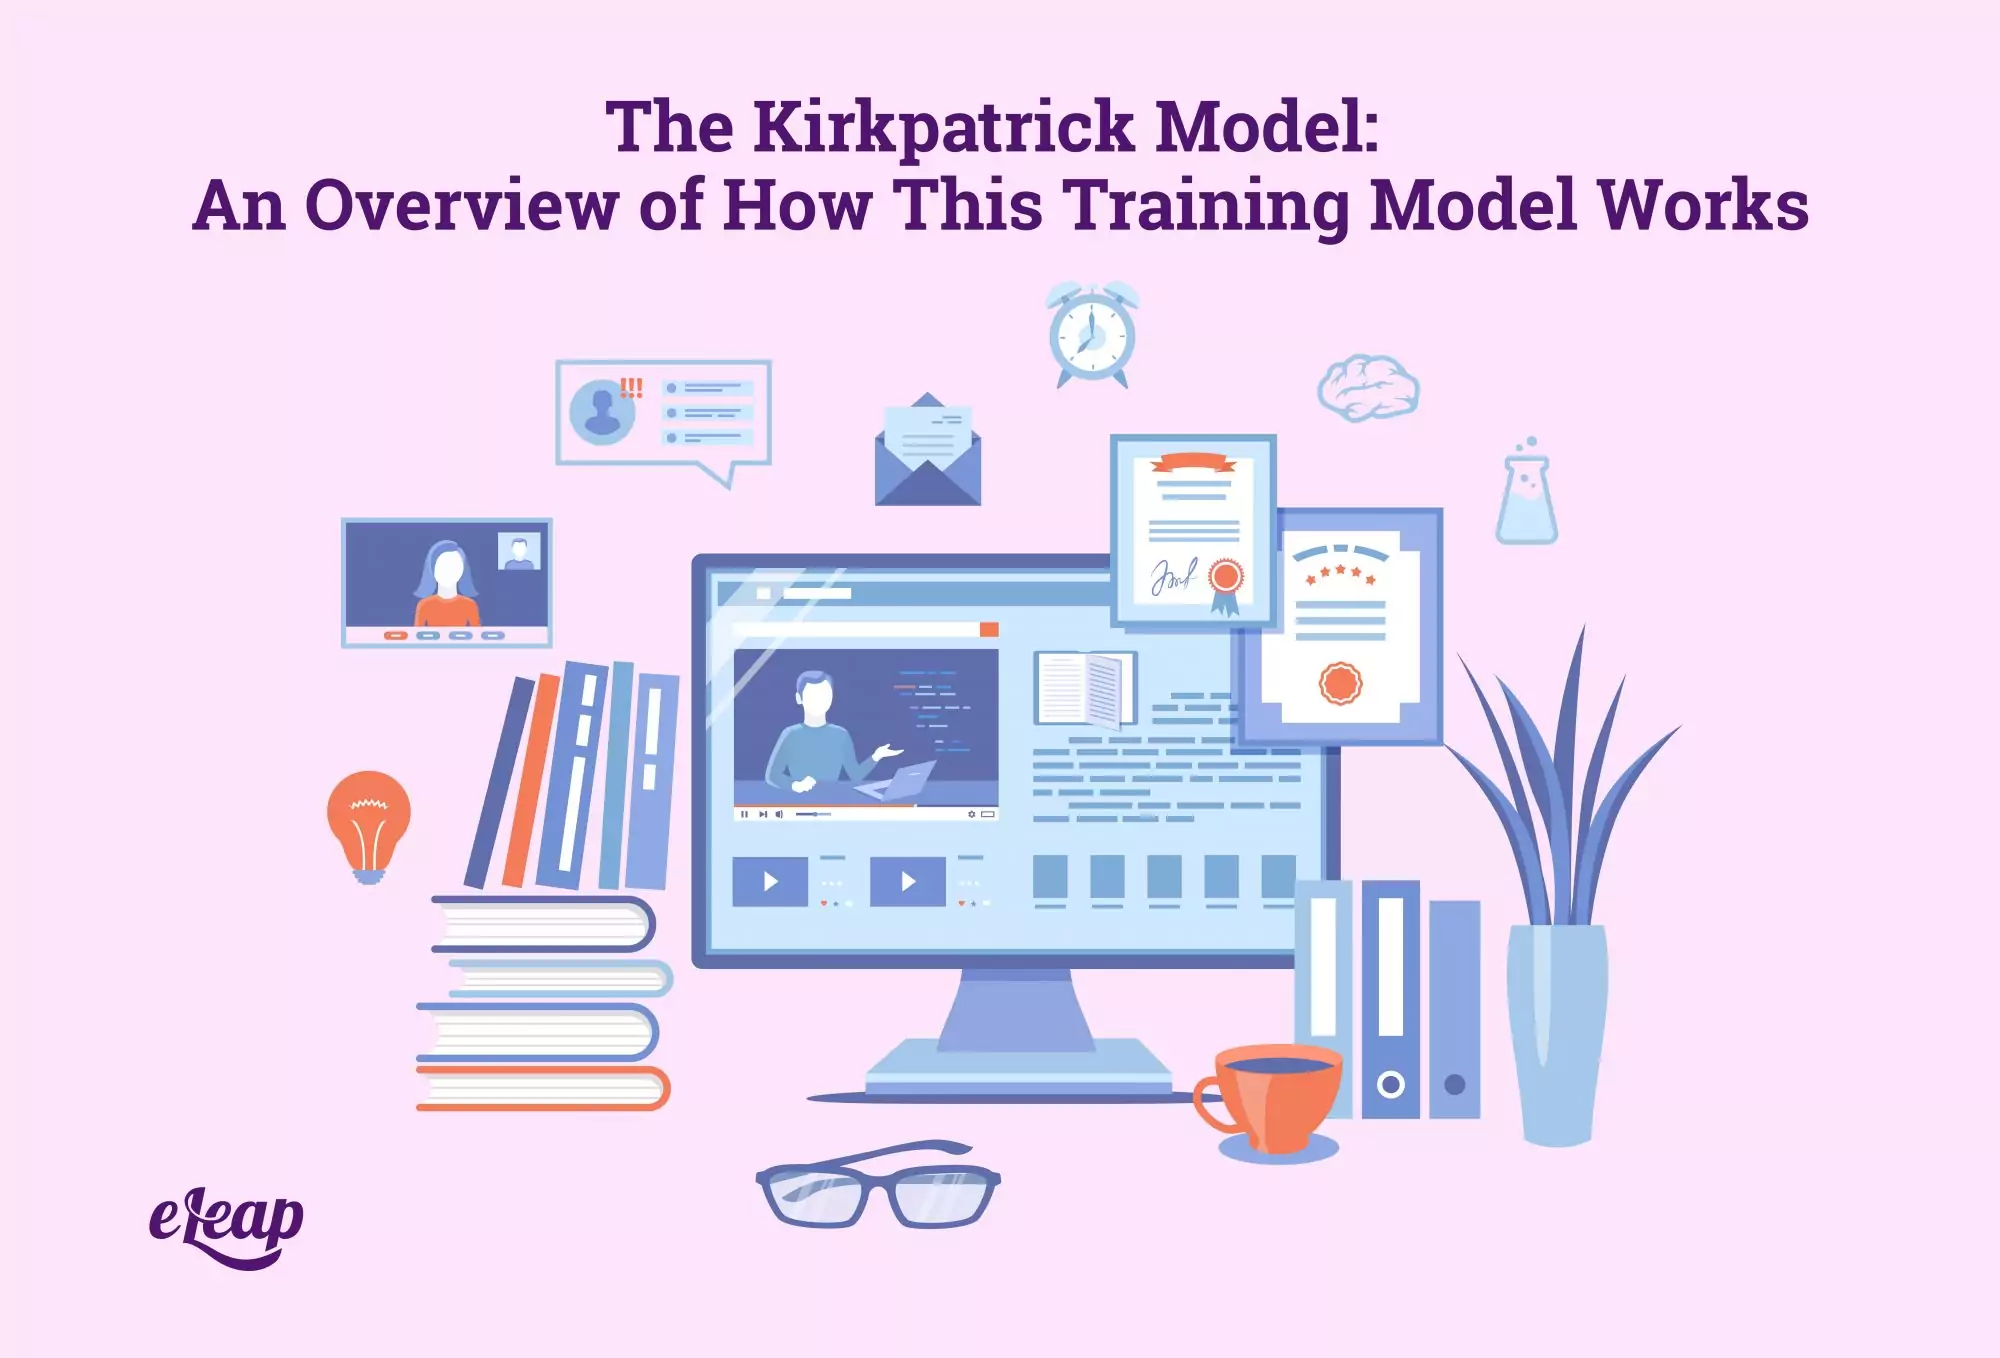 The Kirkpatrick Model: An Overview of How This Training Model Works